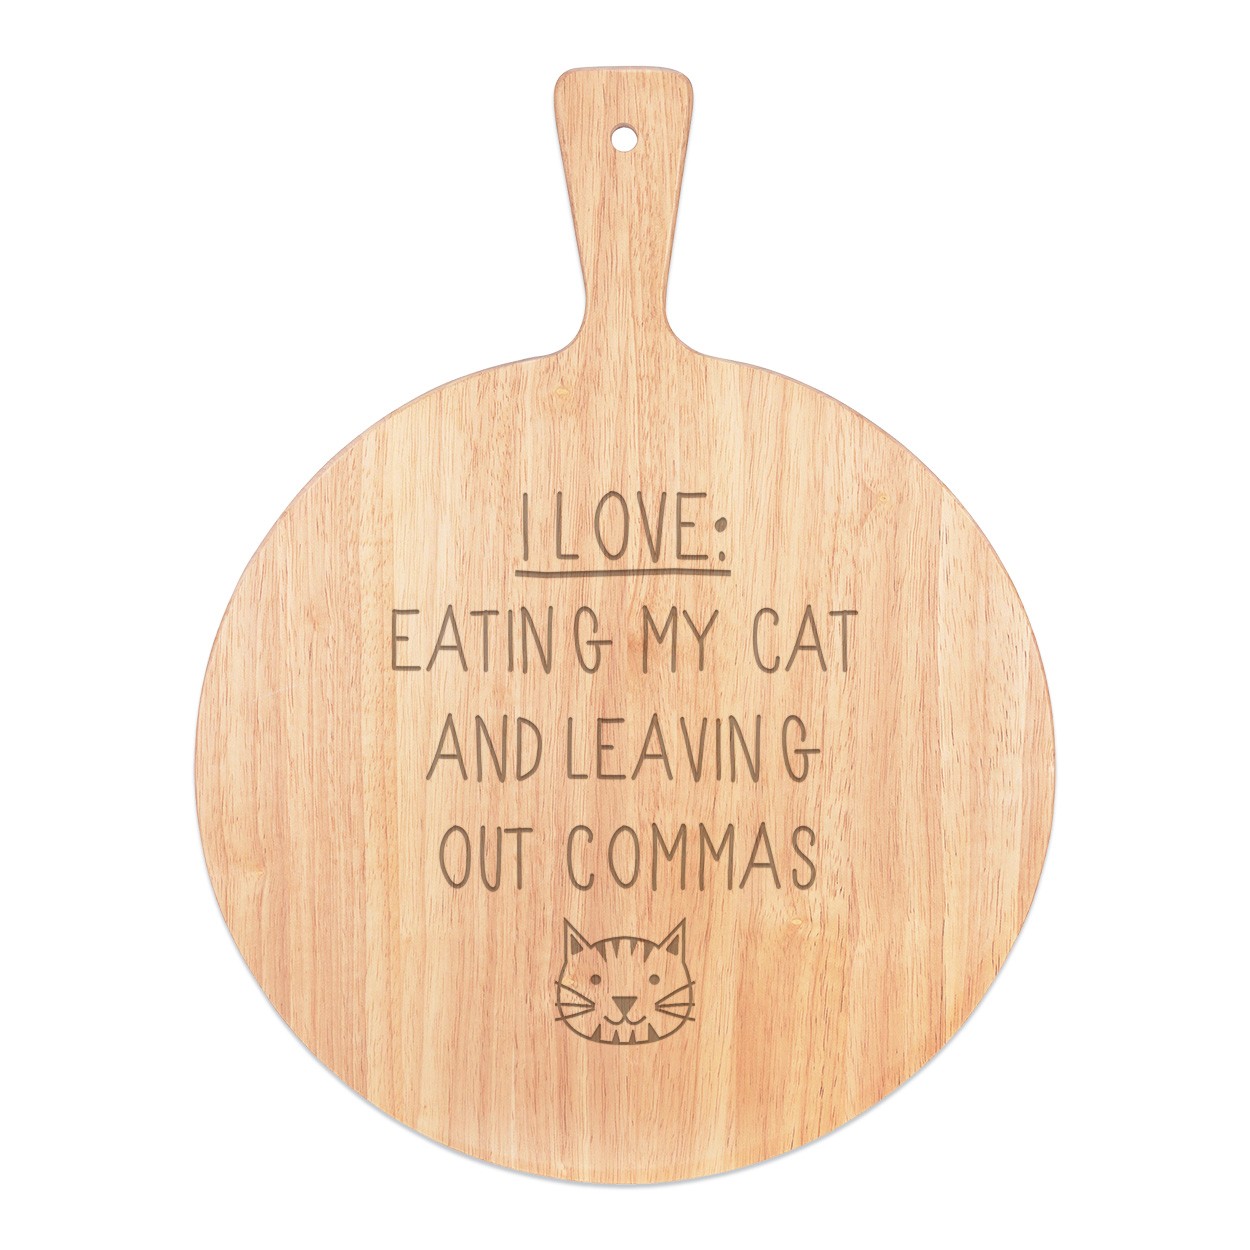 I Love Eating My Cat and Leaving Out Commas Pizza Board Paddle Serving Tray Handle Round Wooden 45x34cm